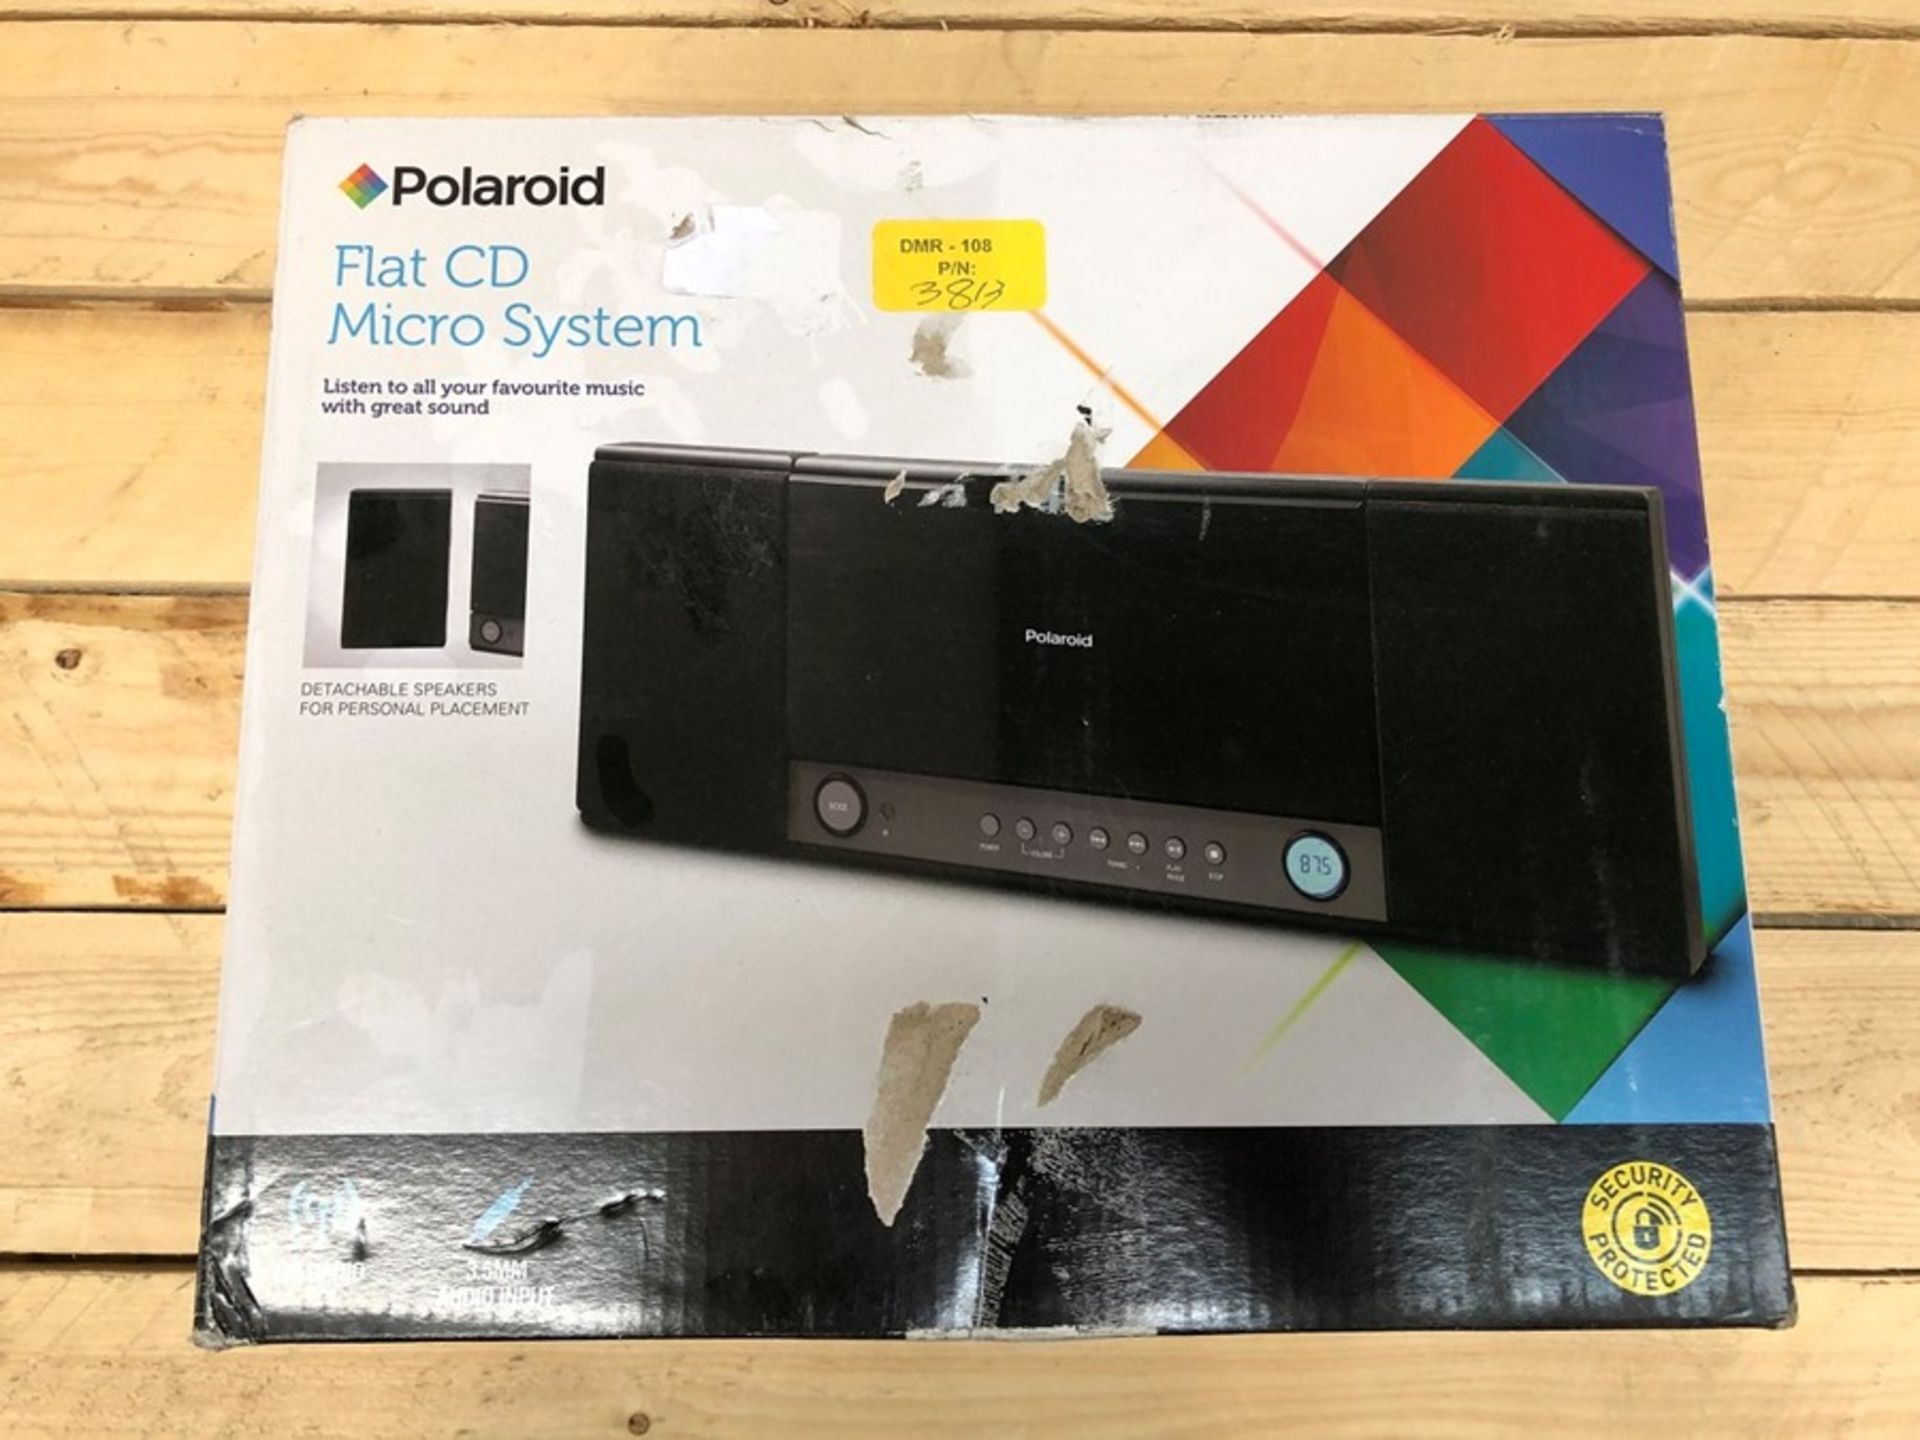 1 BOXED POLAROID FLAT CD MICRO SYSTEM / RRP £35.00 (VIEWING HIGHLY RECOMMENDED)